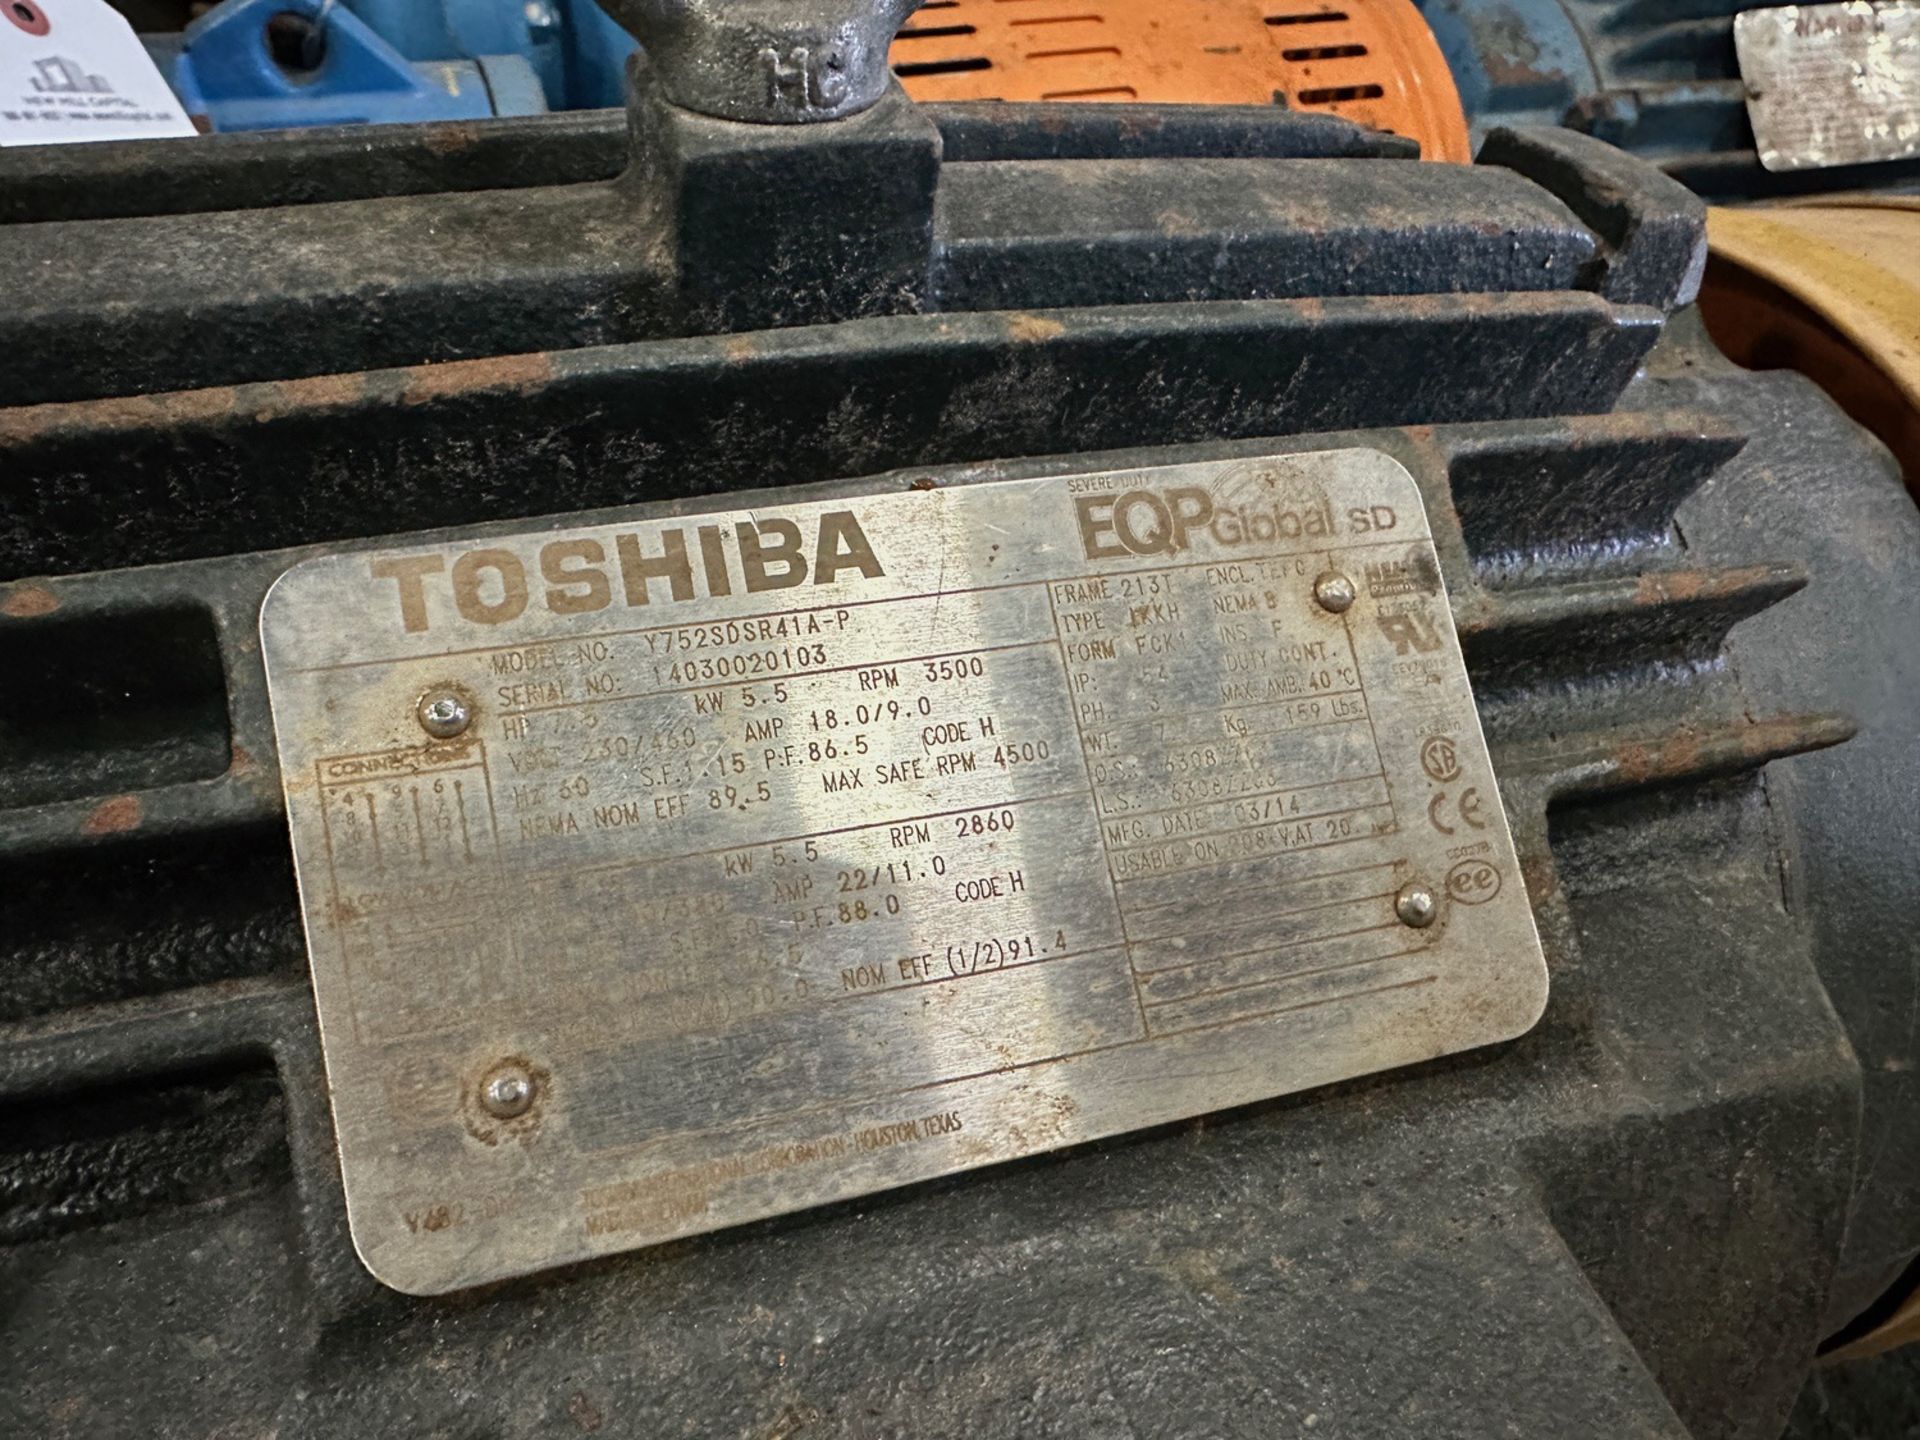 Toshiba 7.5 HP Severe Duty EQP Global Industrial Motor with Goulds Model | Rig Fee $25 - Image 2 of 4